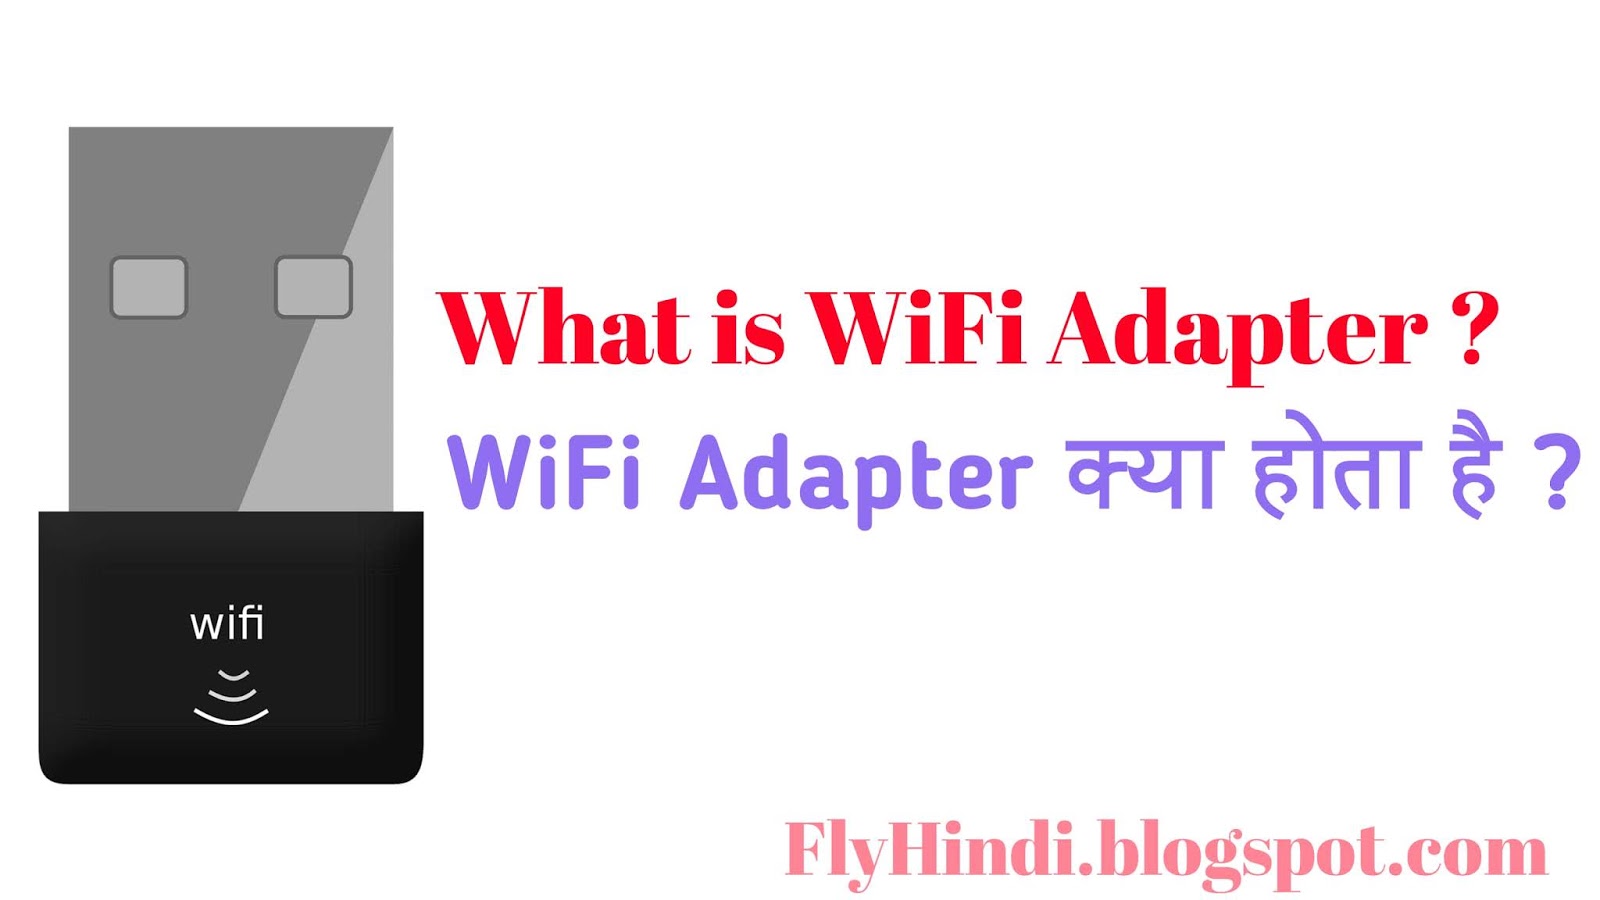 You are currently viewing Wifi Adapter kya hota hai? What is Wifi Adapter in Hindi